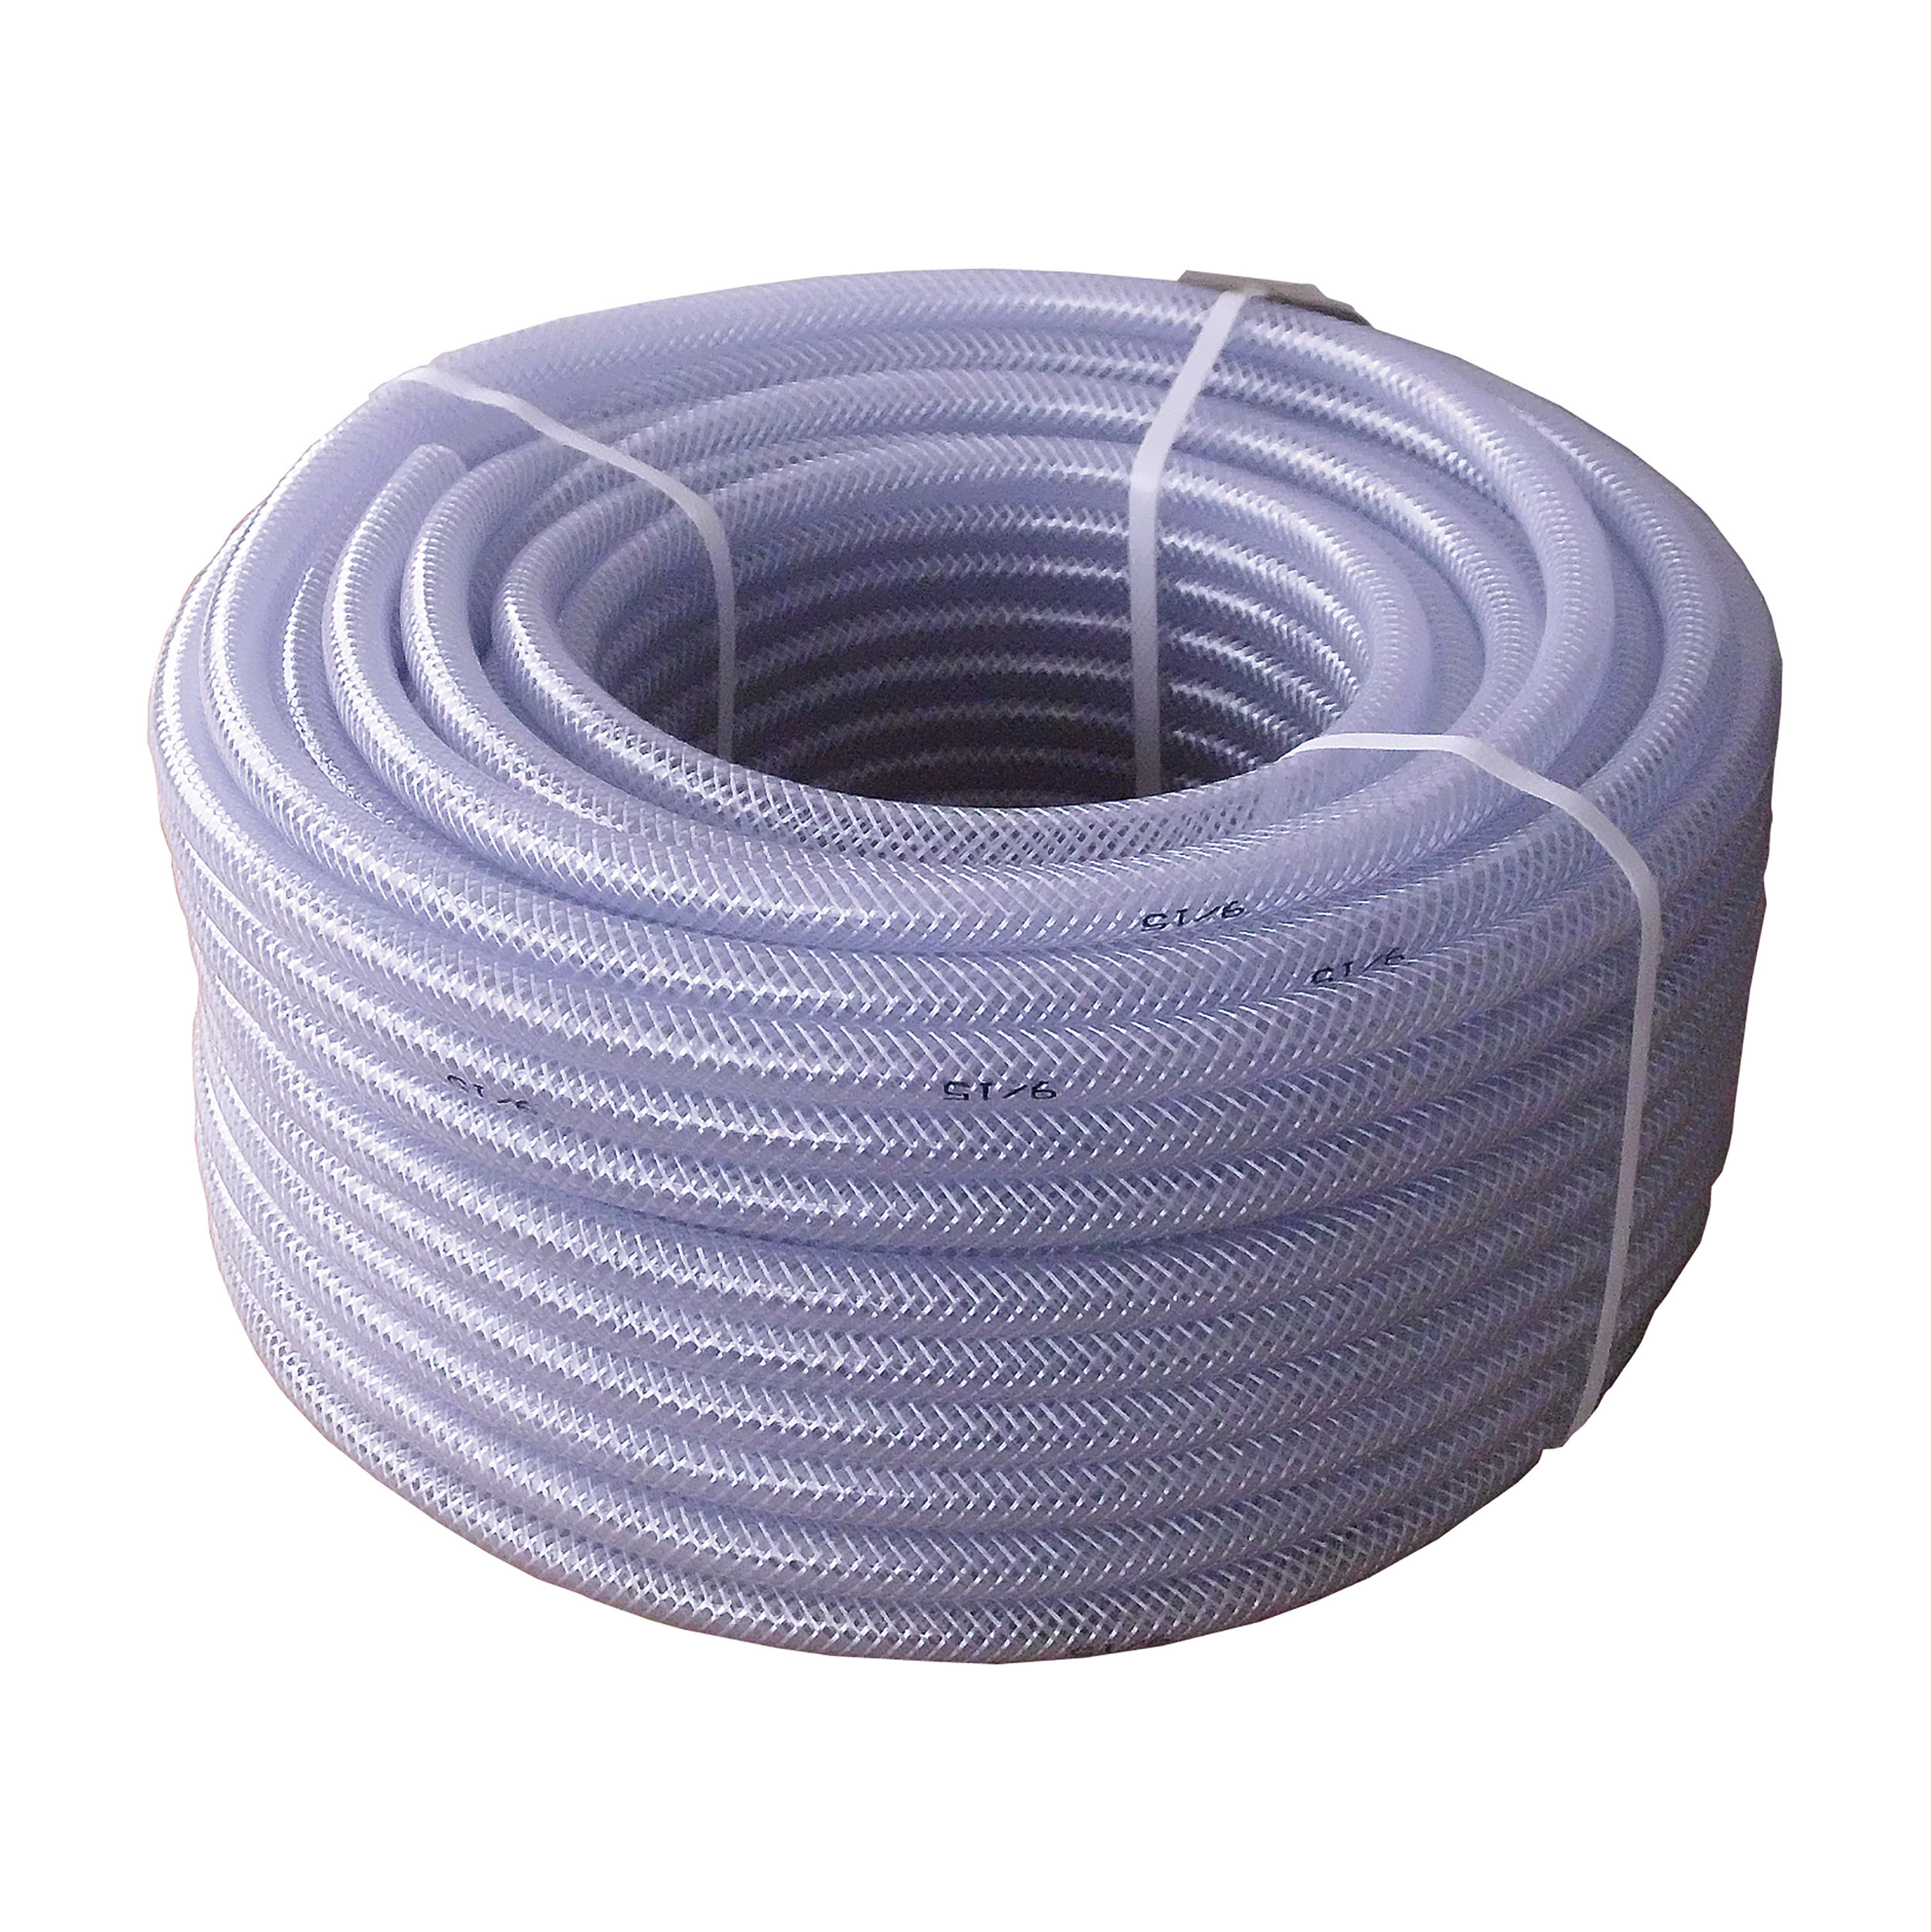 PVC fabric hose, roll, 50 m, without connectors